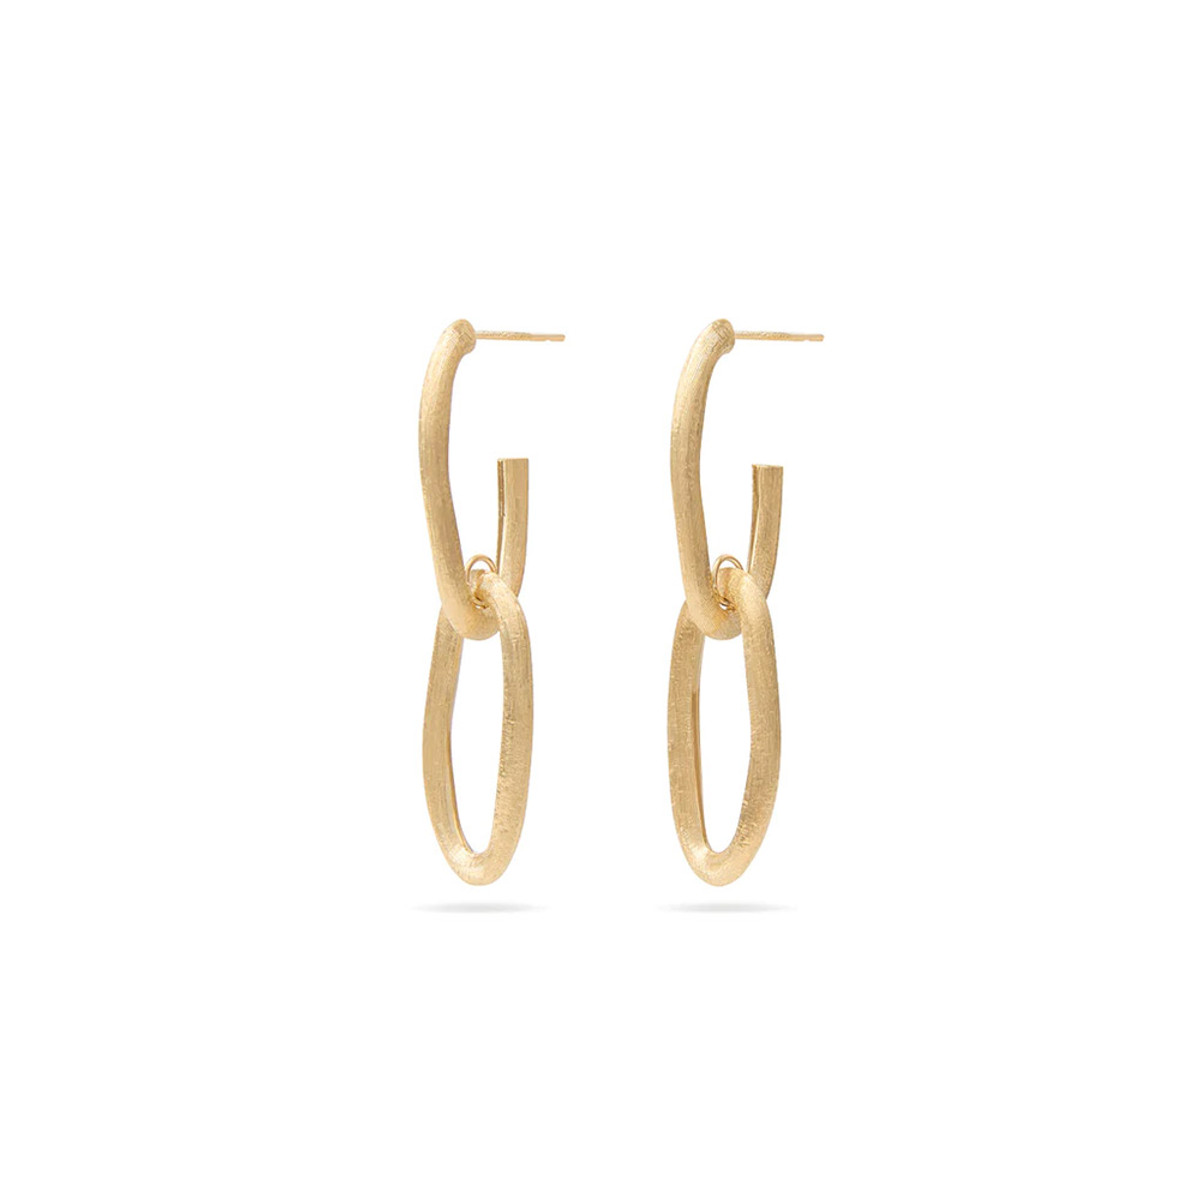 Marco Bicego Jaipur Link Collection 18K Yellow Gold Oval Double Link Earrings-44443 Product Image